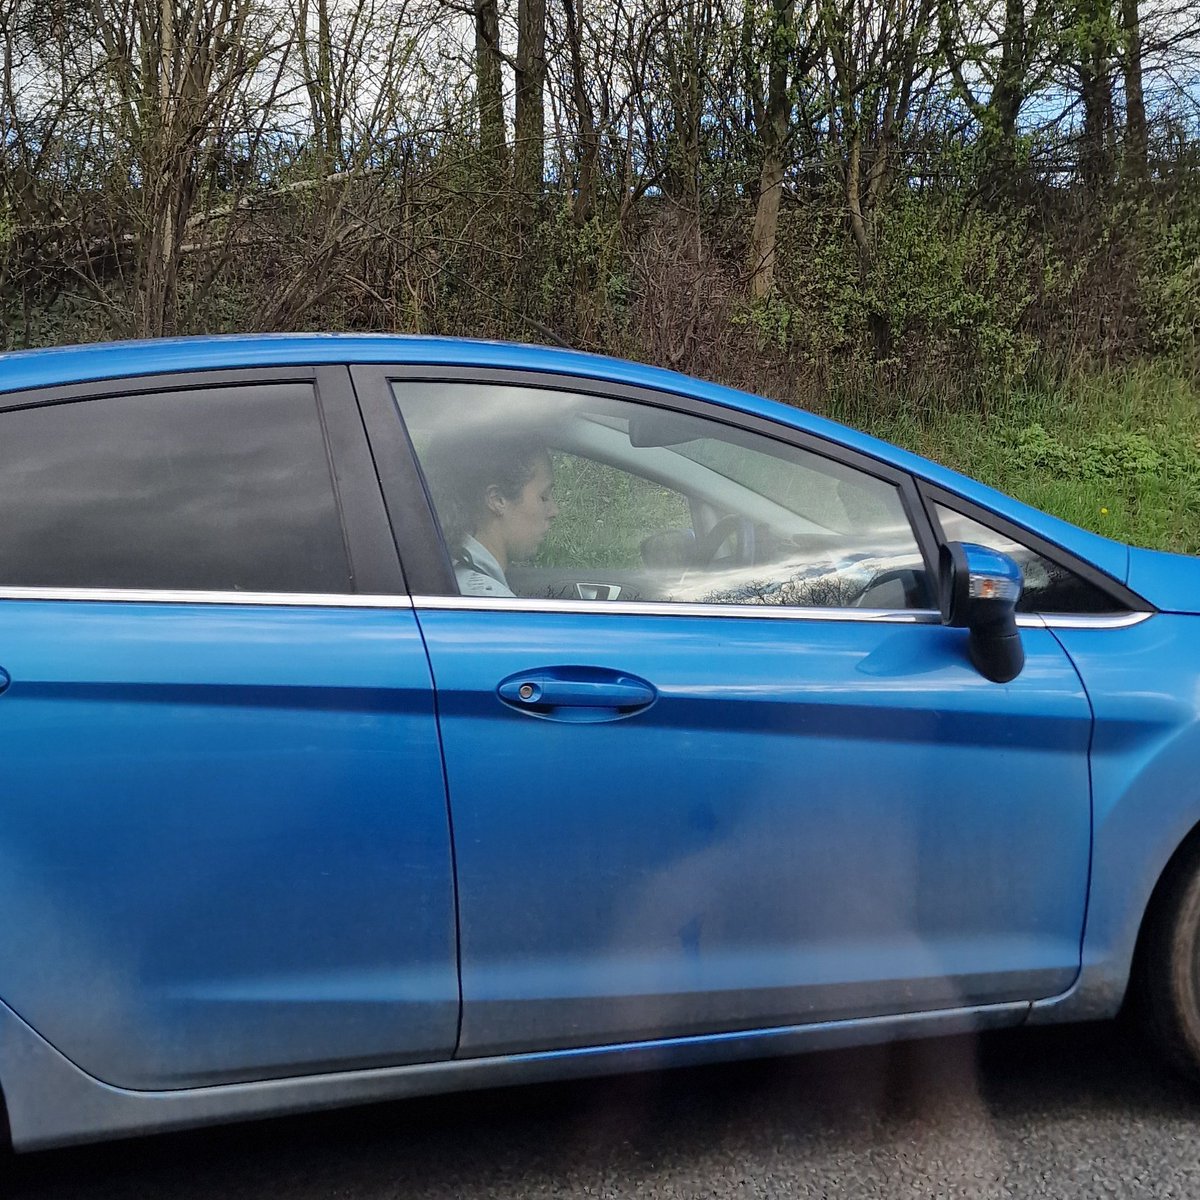 Watch out for this one when out and about, she likes to use her phone whilst driving. Spotted on the A5. Reg: BK61 0ZB

#DumbAssDrivers #TextingAndDriving #Police